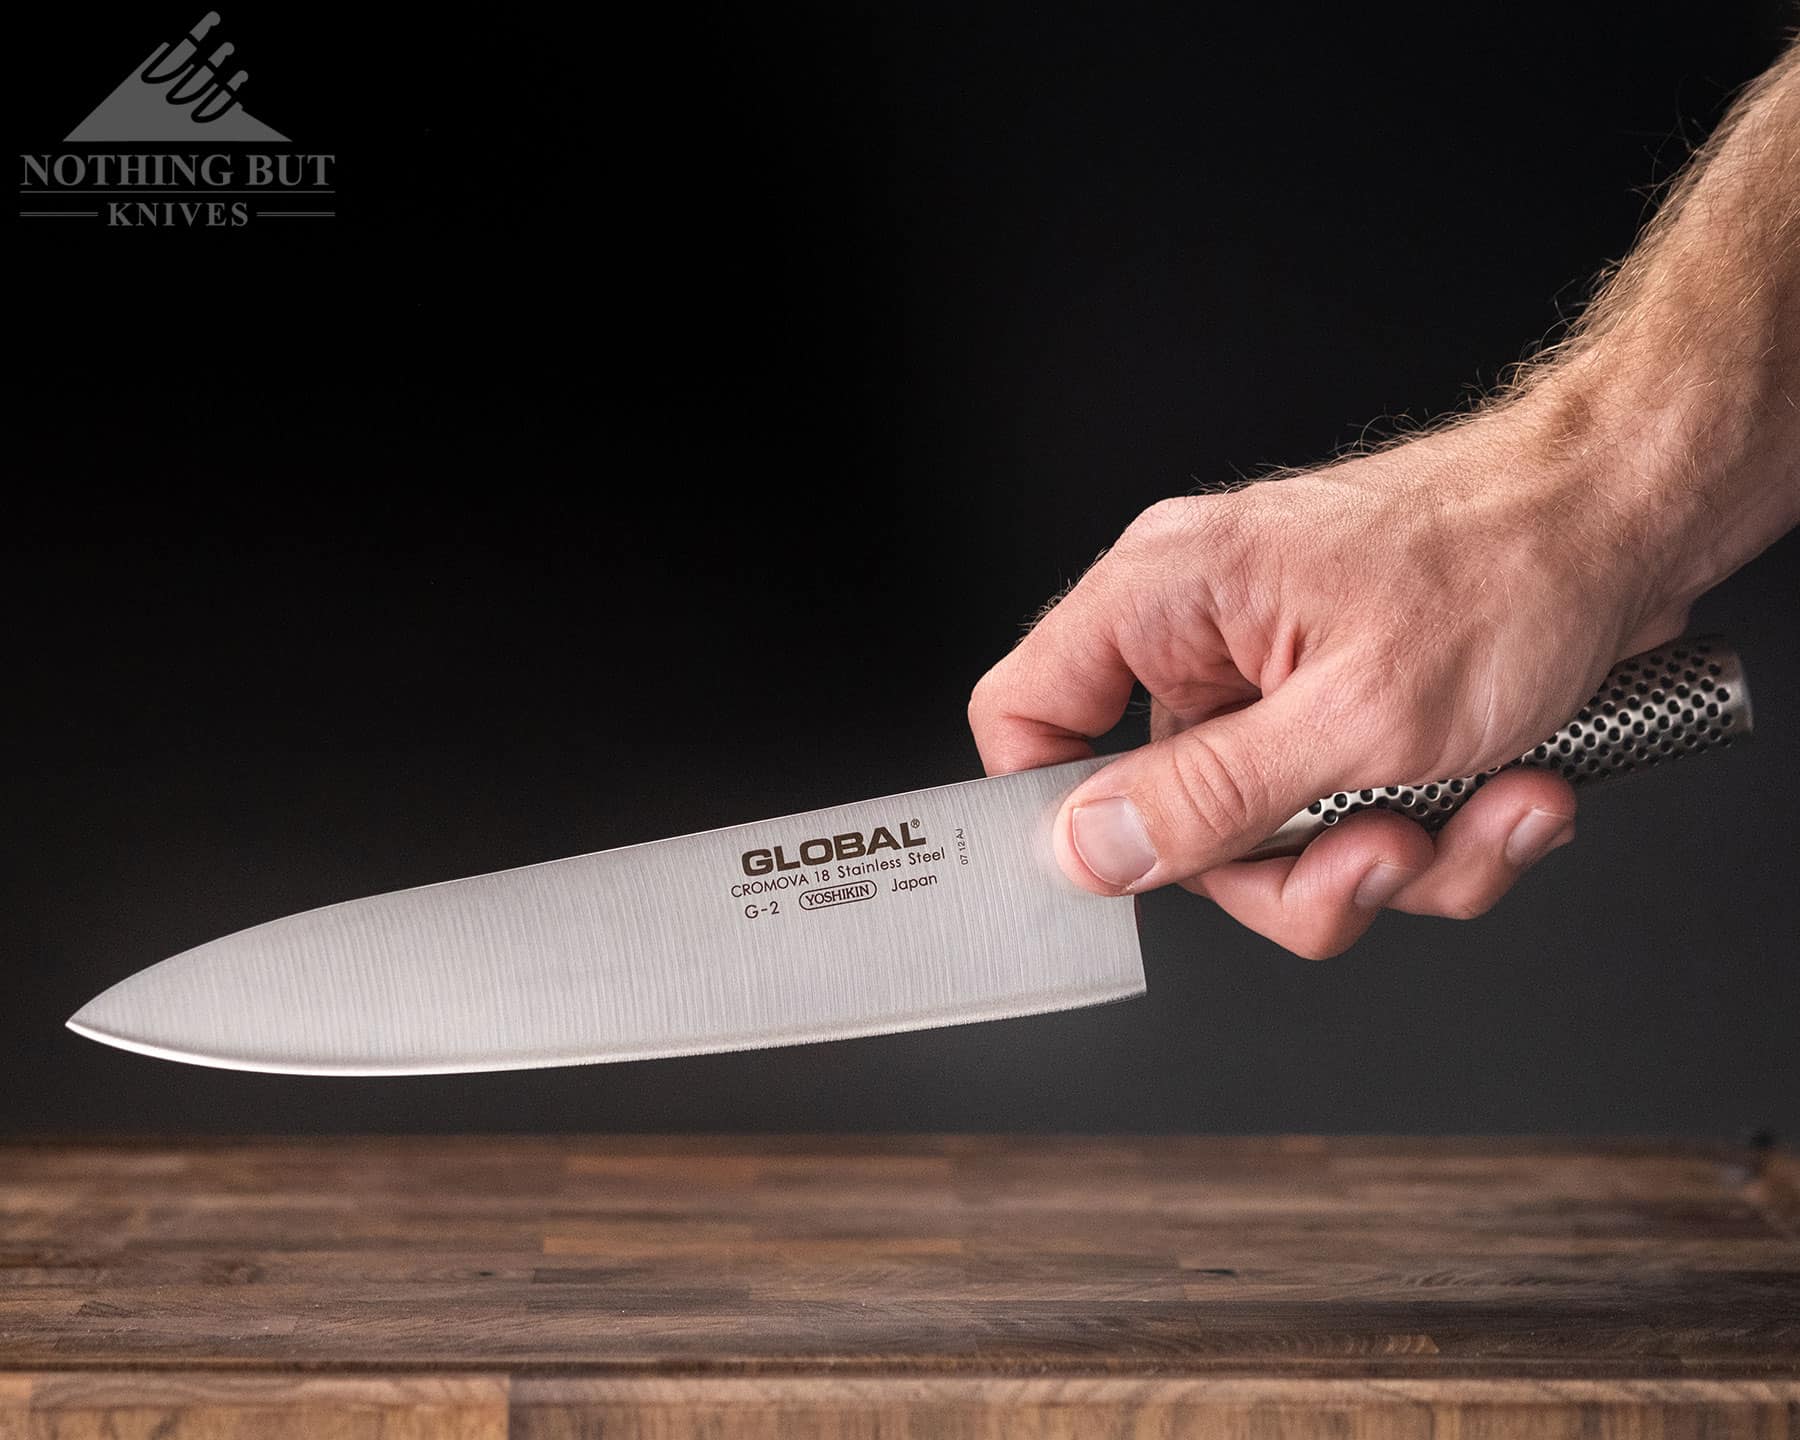 Pinch Grip On The Global G2 CHef Knife 